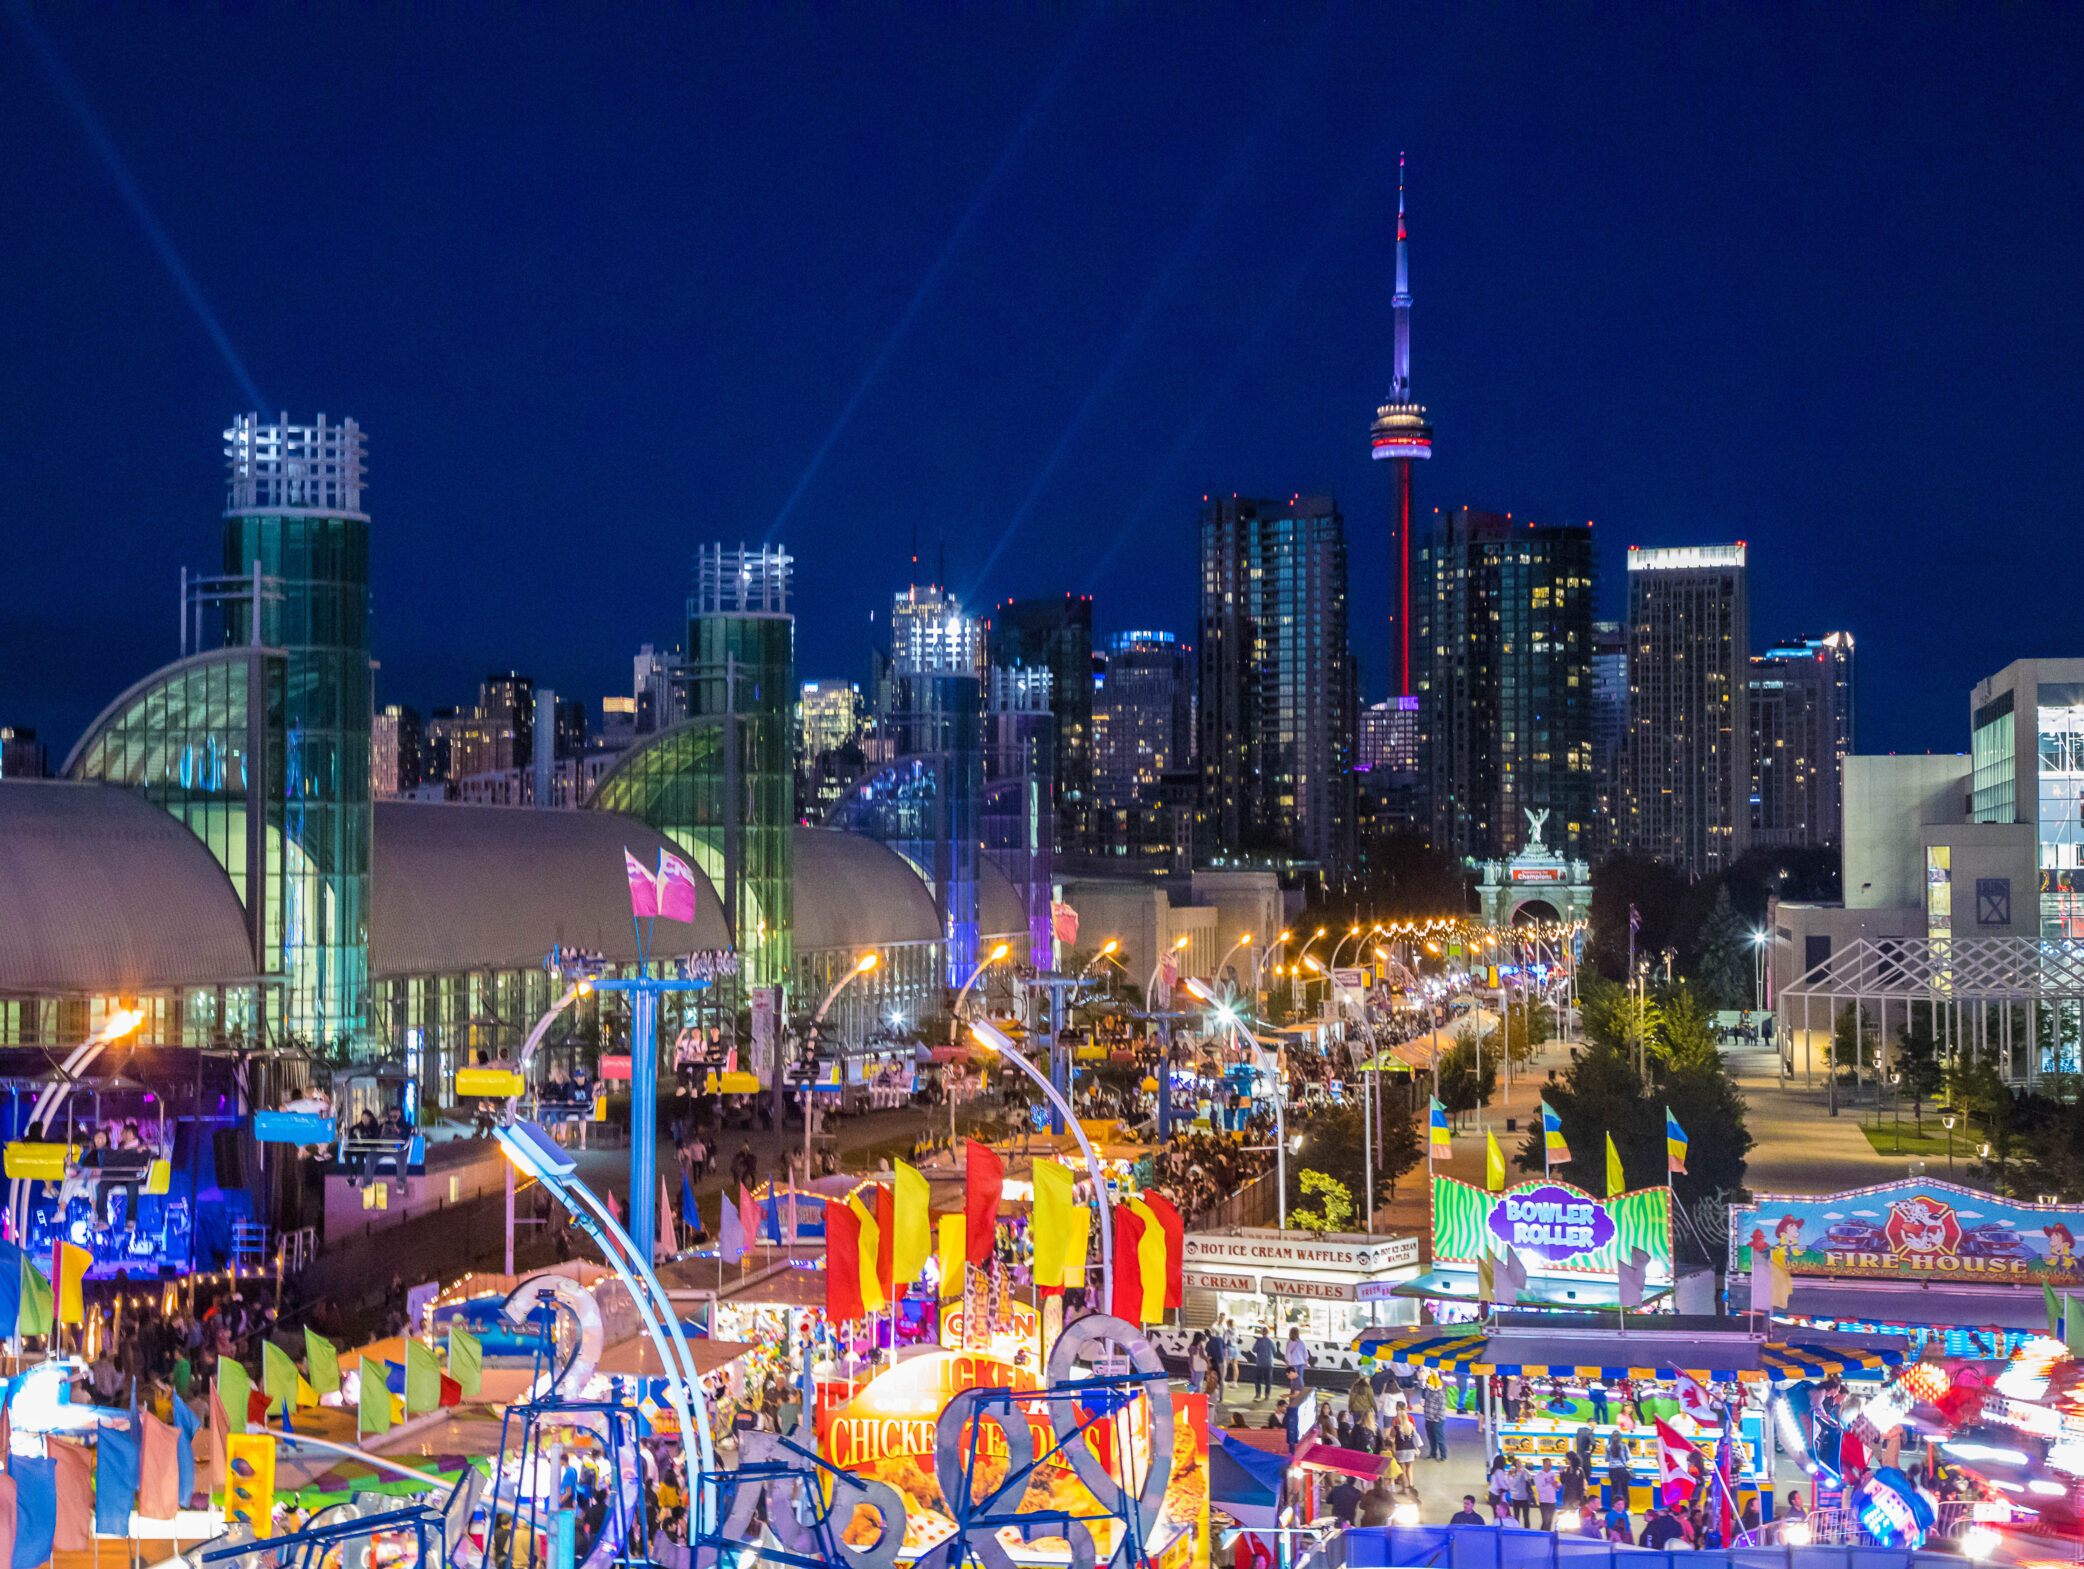 Aerial view of the Toronto skyline at night. Image of the CNE Midway, Enercare Centre, and CN Tower in the background.